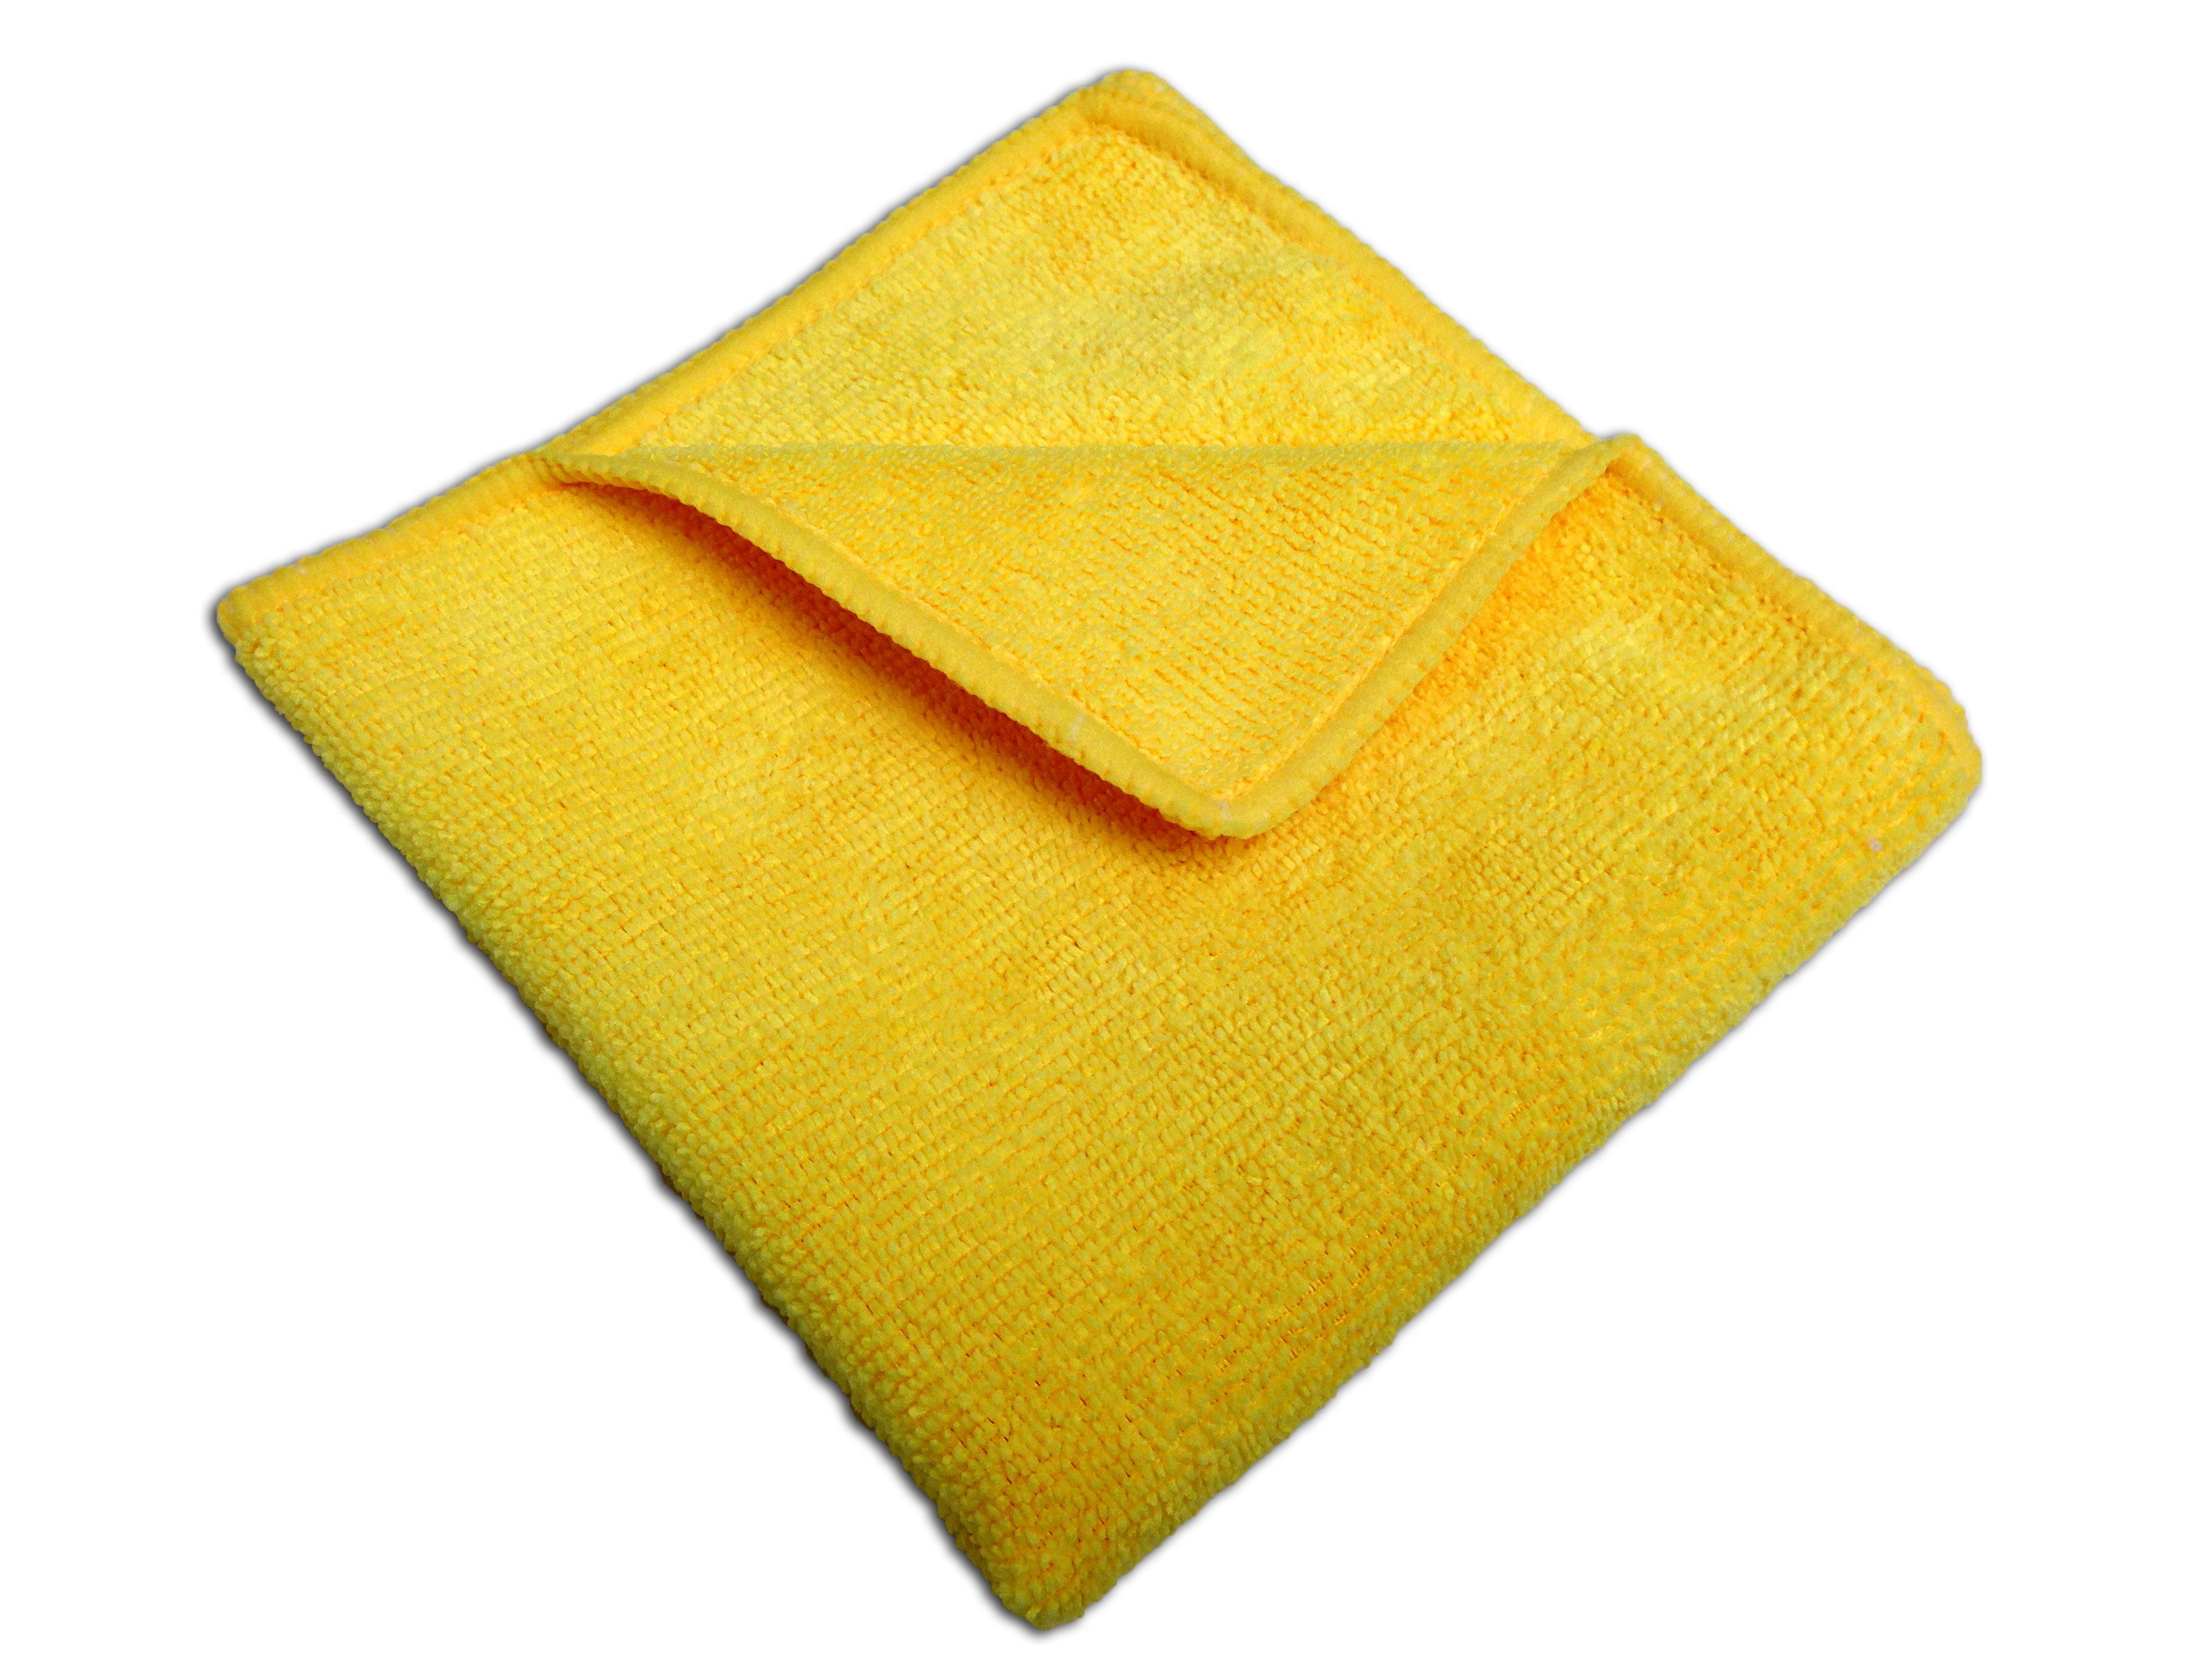 24 Microfiber 16"x16" Cleaning Cloths Detailing Polishing Towels Rags 300GSM 